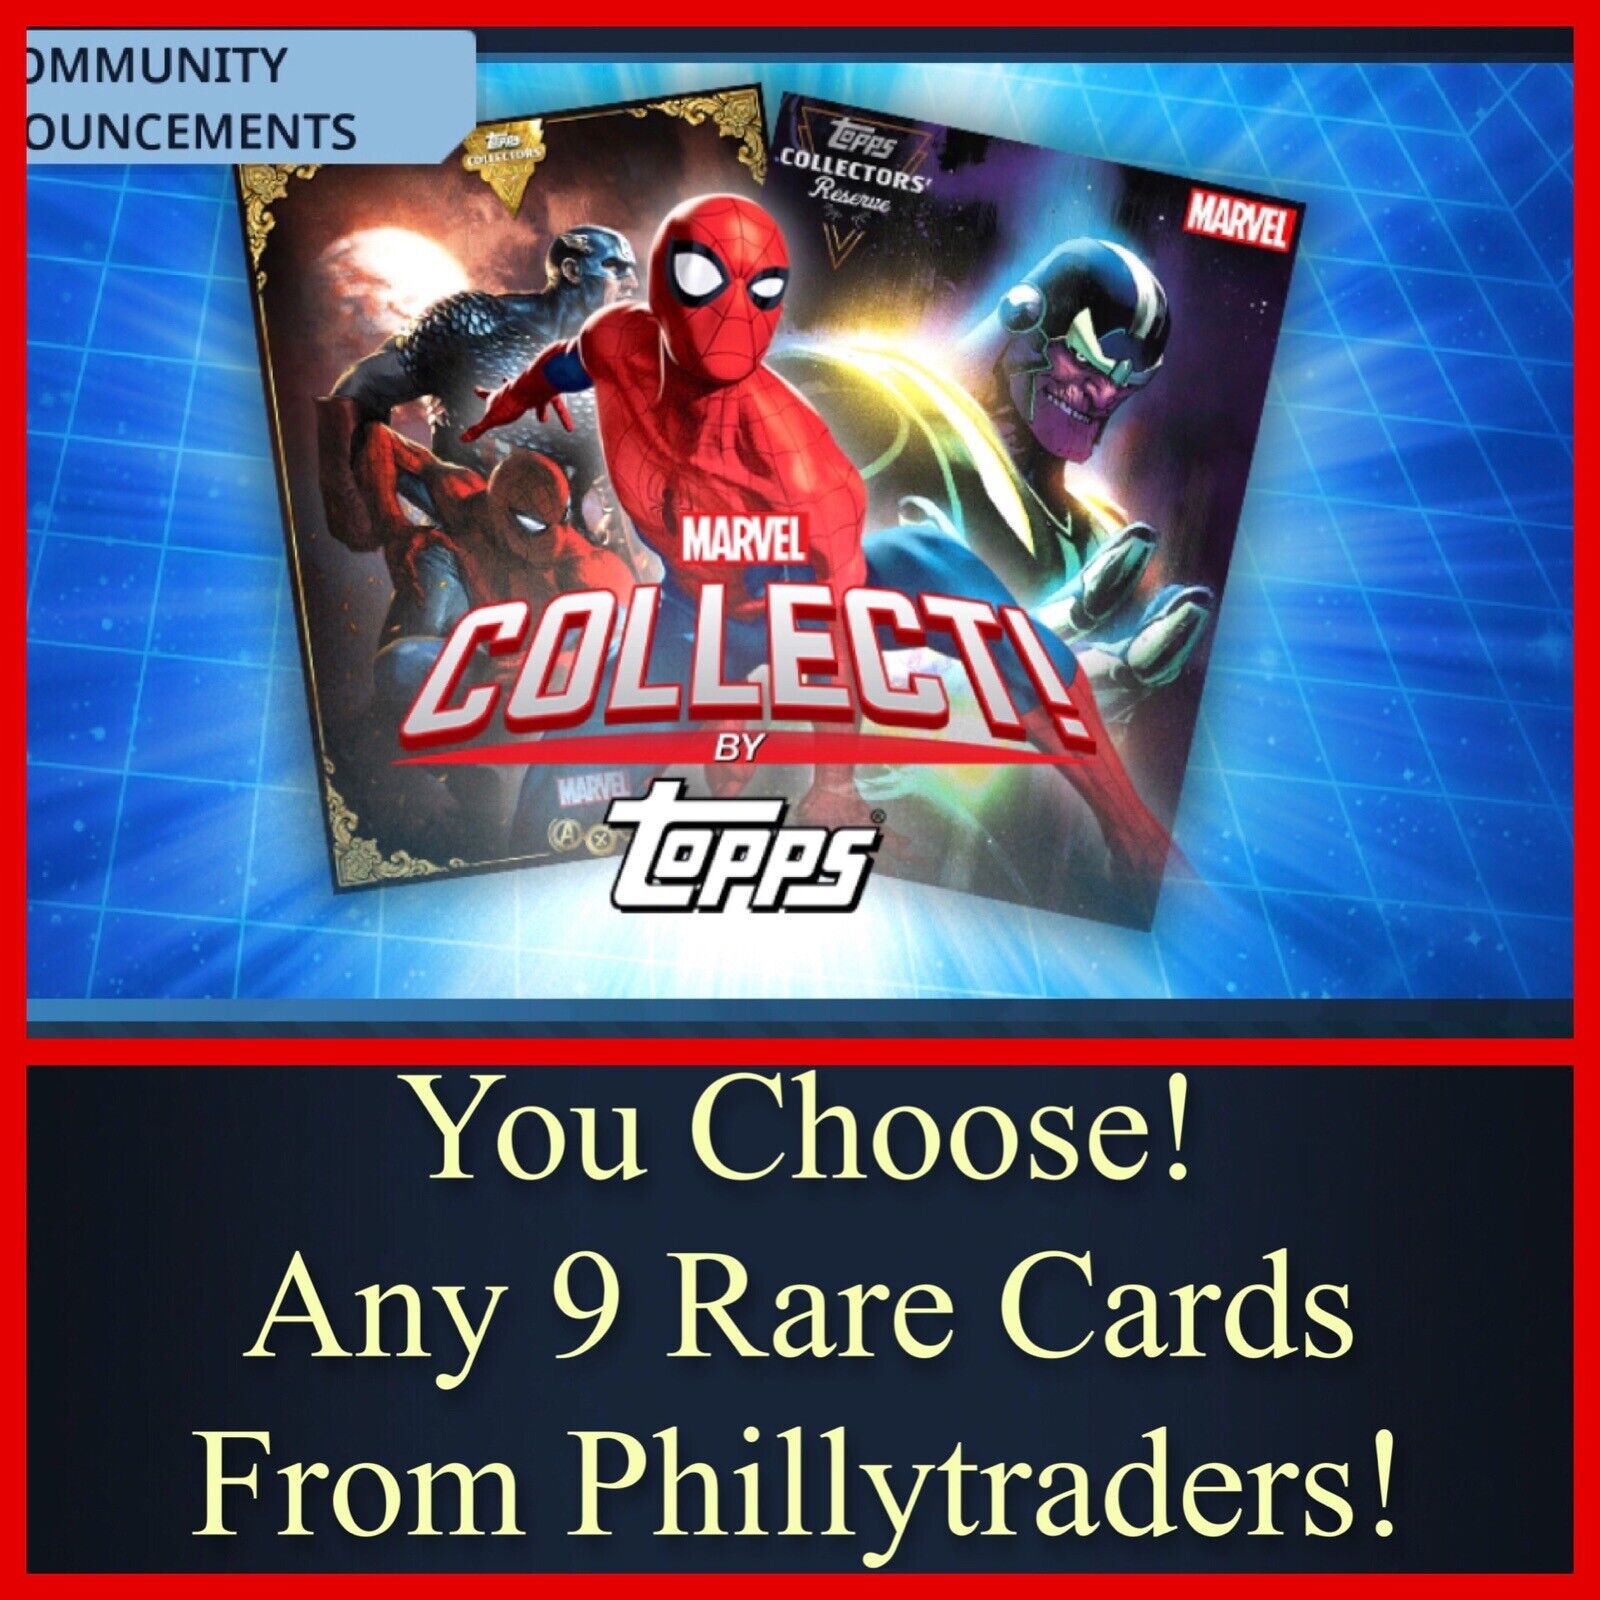 YOU CHOOSE ANY NINE RARE CARDS FROM OUR ACCOUNTS-TOPPS MARVEL COLLECT